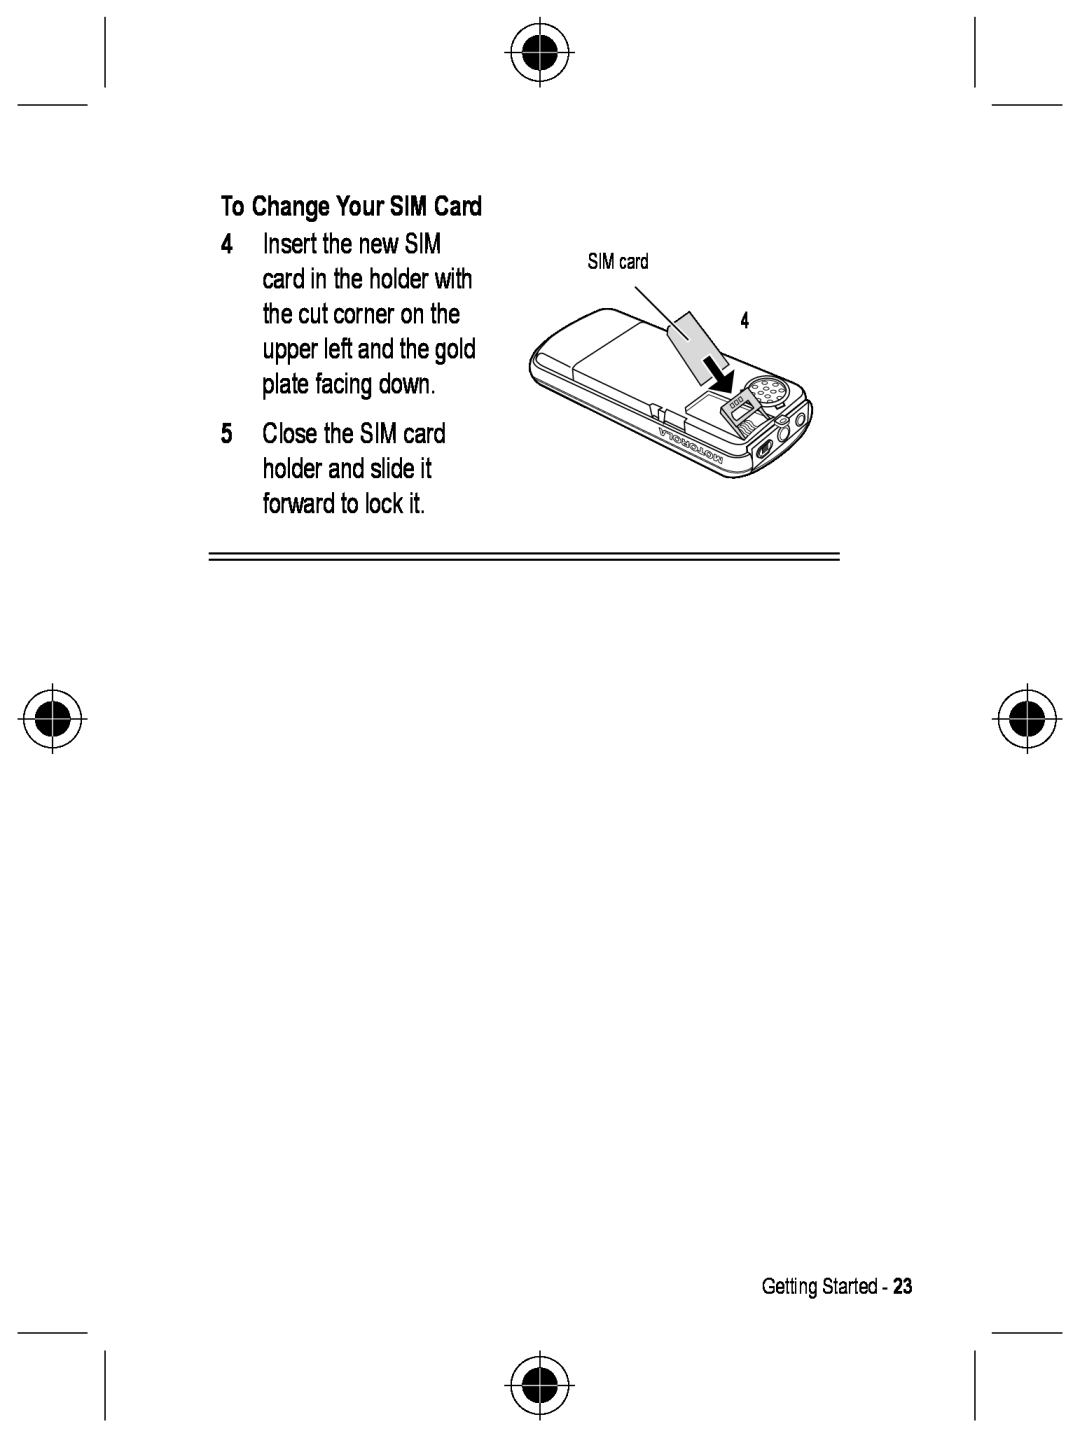 Motorola C330 manual To Change Your SIM Card, Close the SIM card holder and slide it forward to lock it, Getting Started 